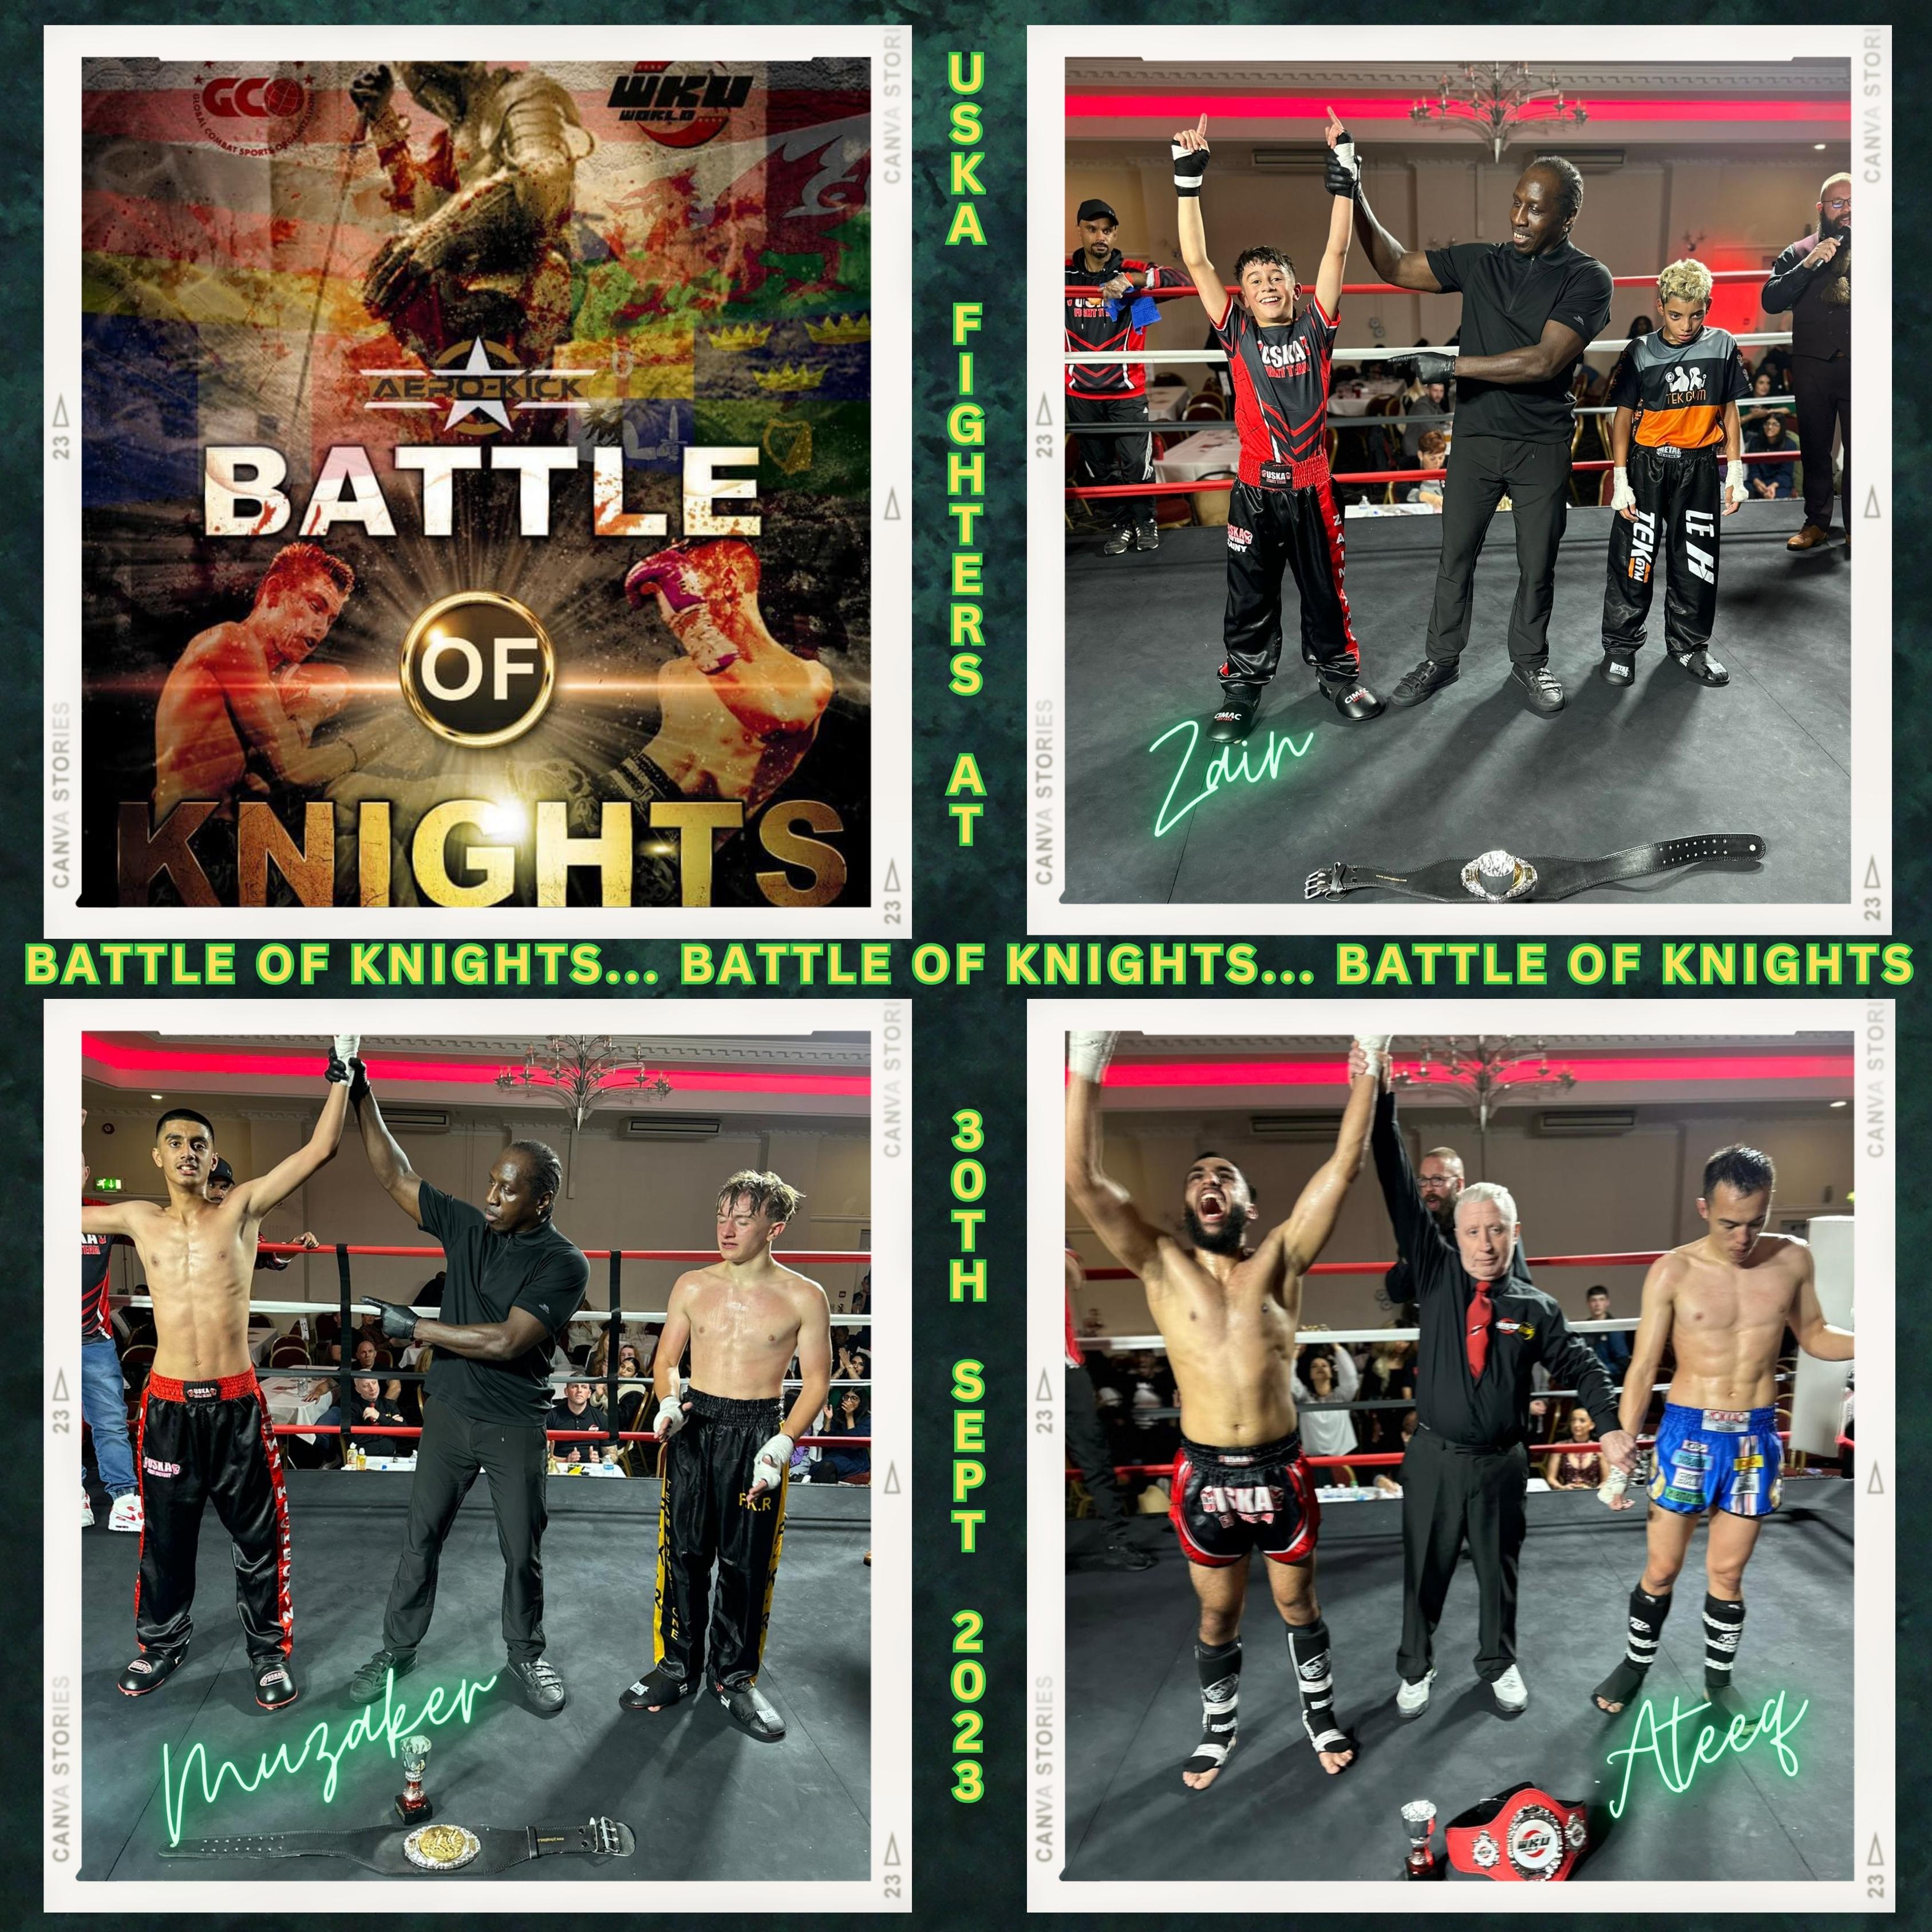 30-09-23 - 3 out of 3 for USKA Trio on Battle of Knights Fight Gala!